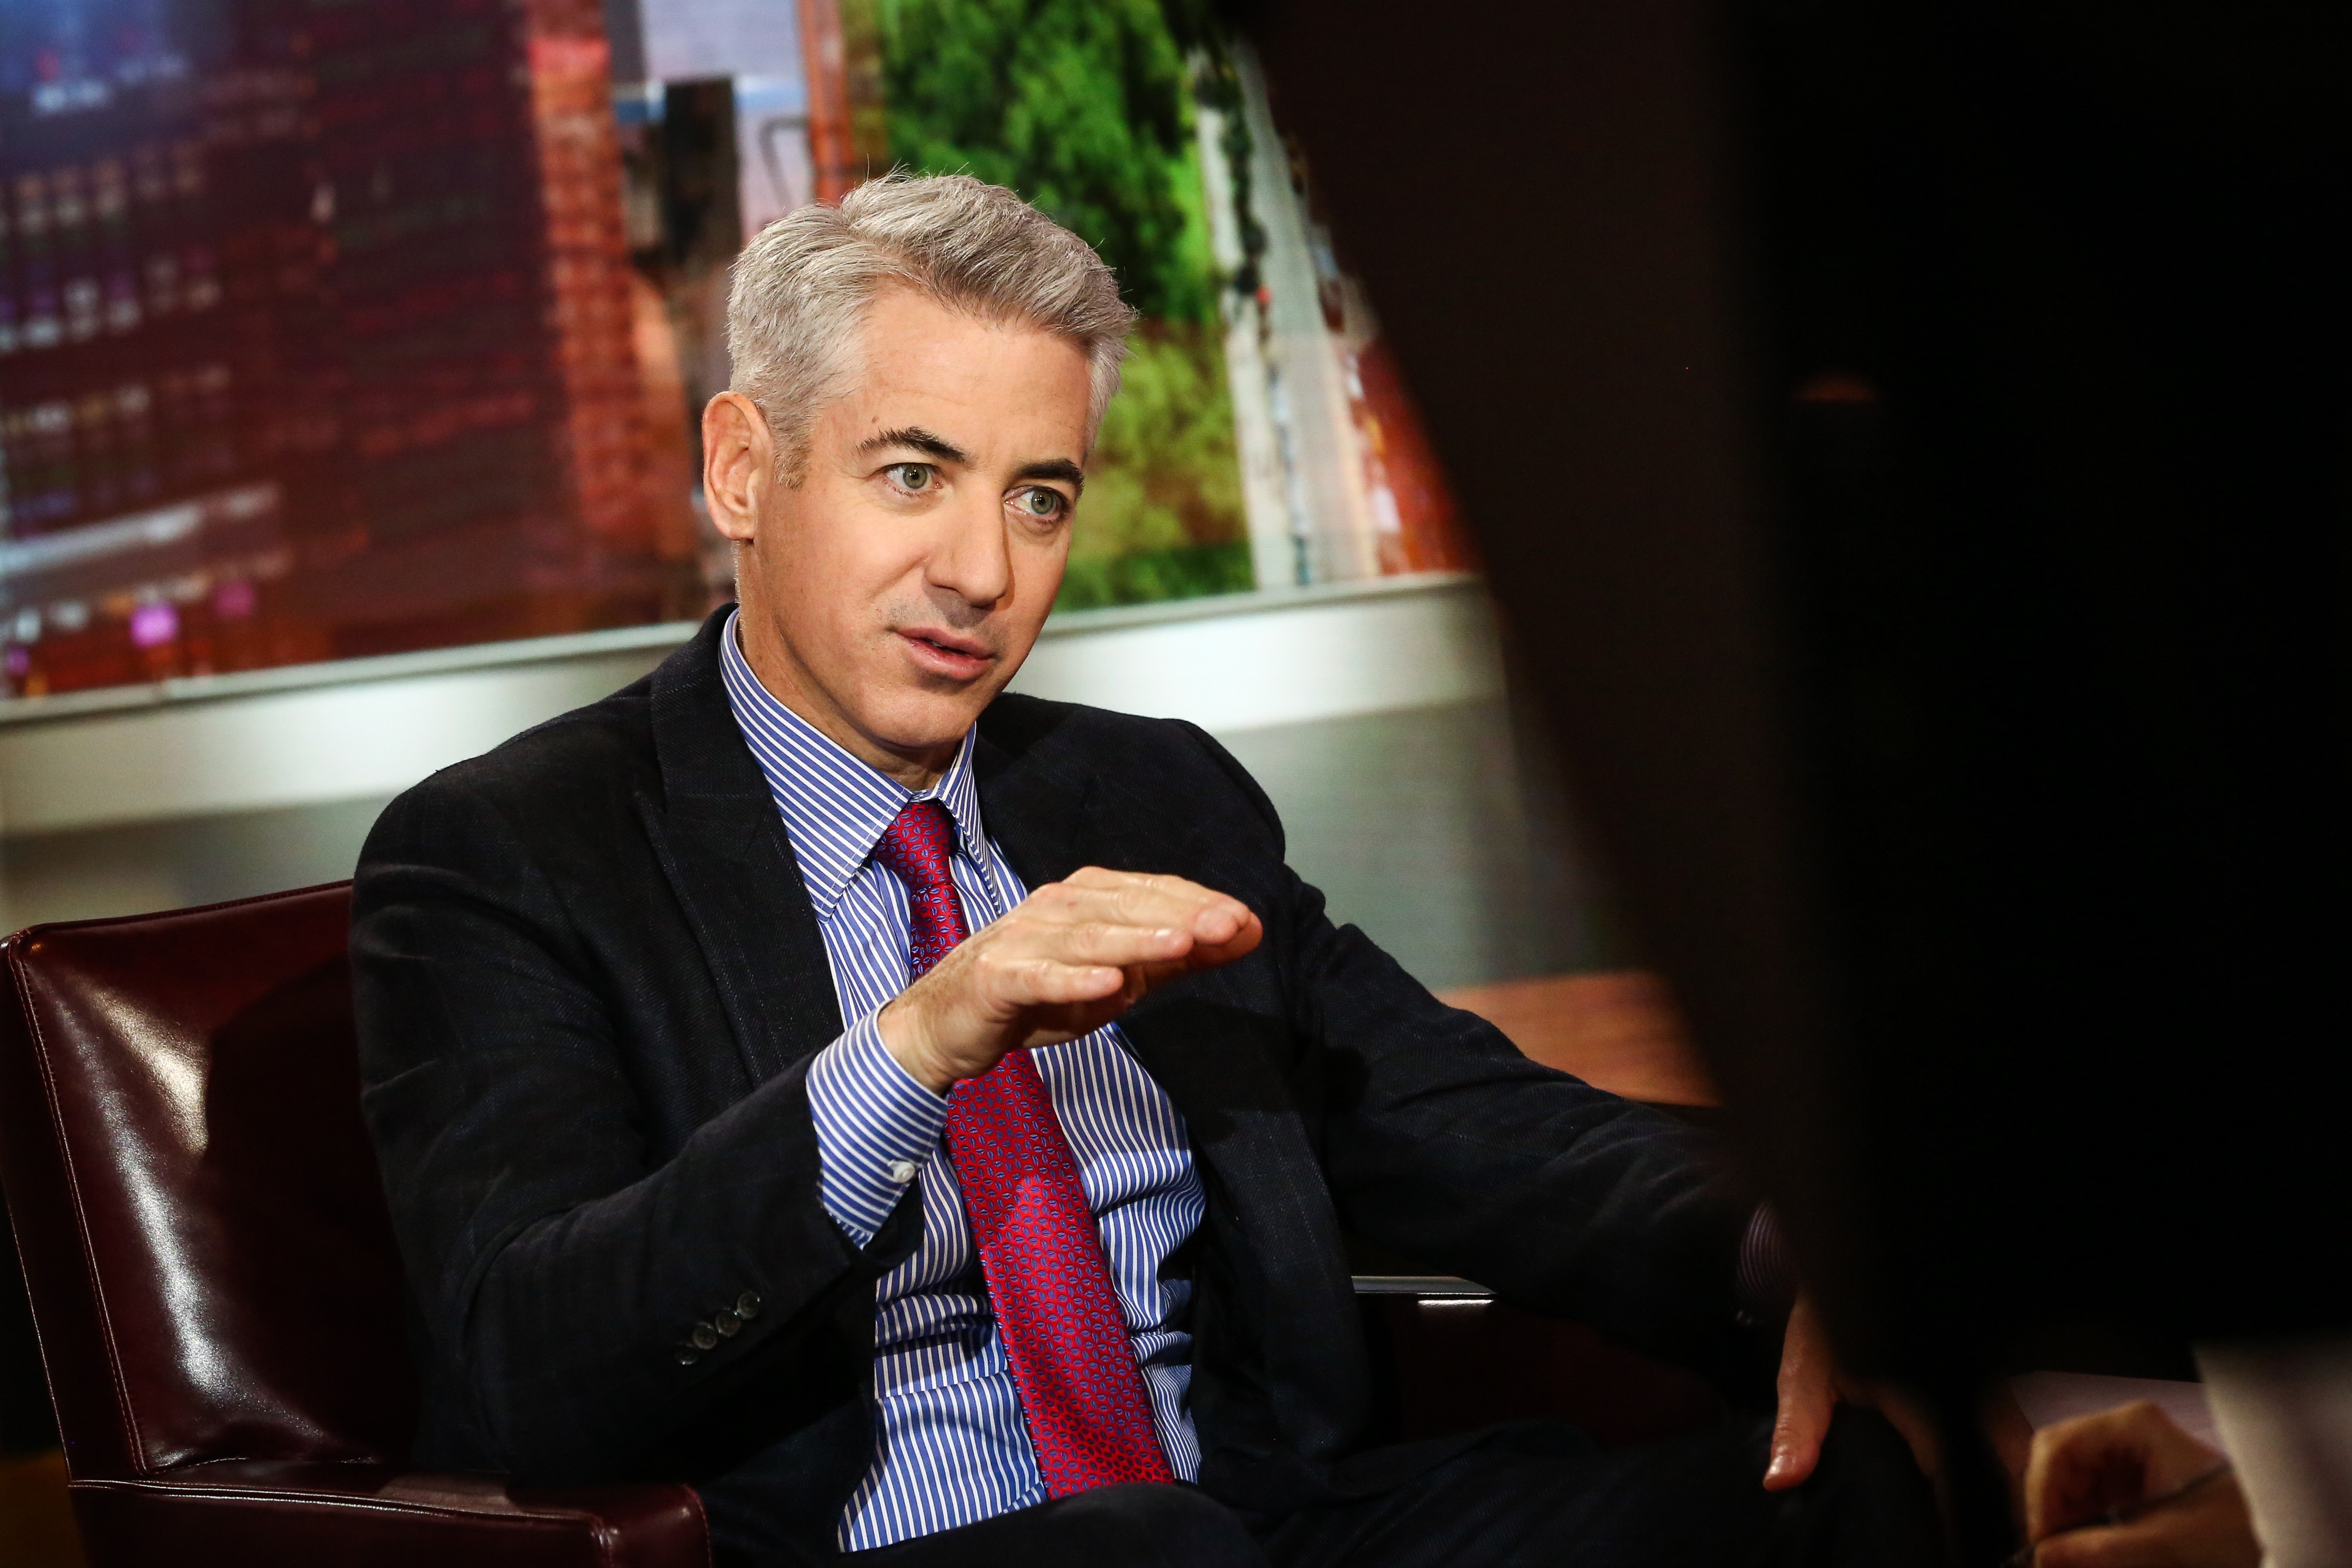 Bill Ackman, chief executive officer of Pershing Square Capital Management